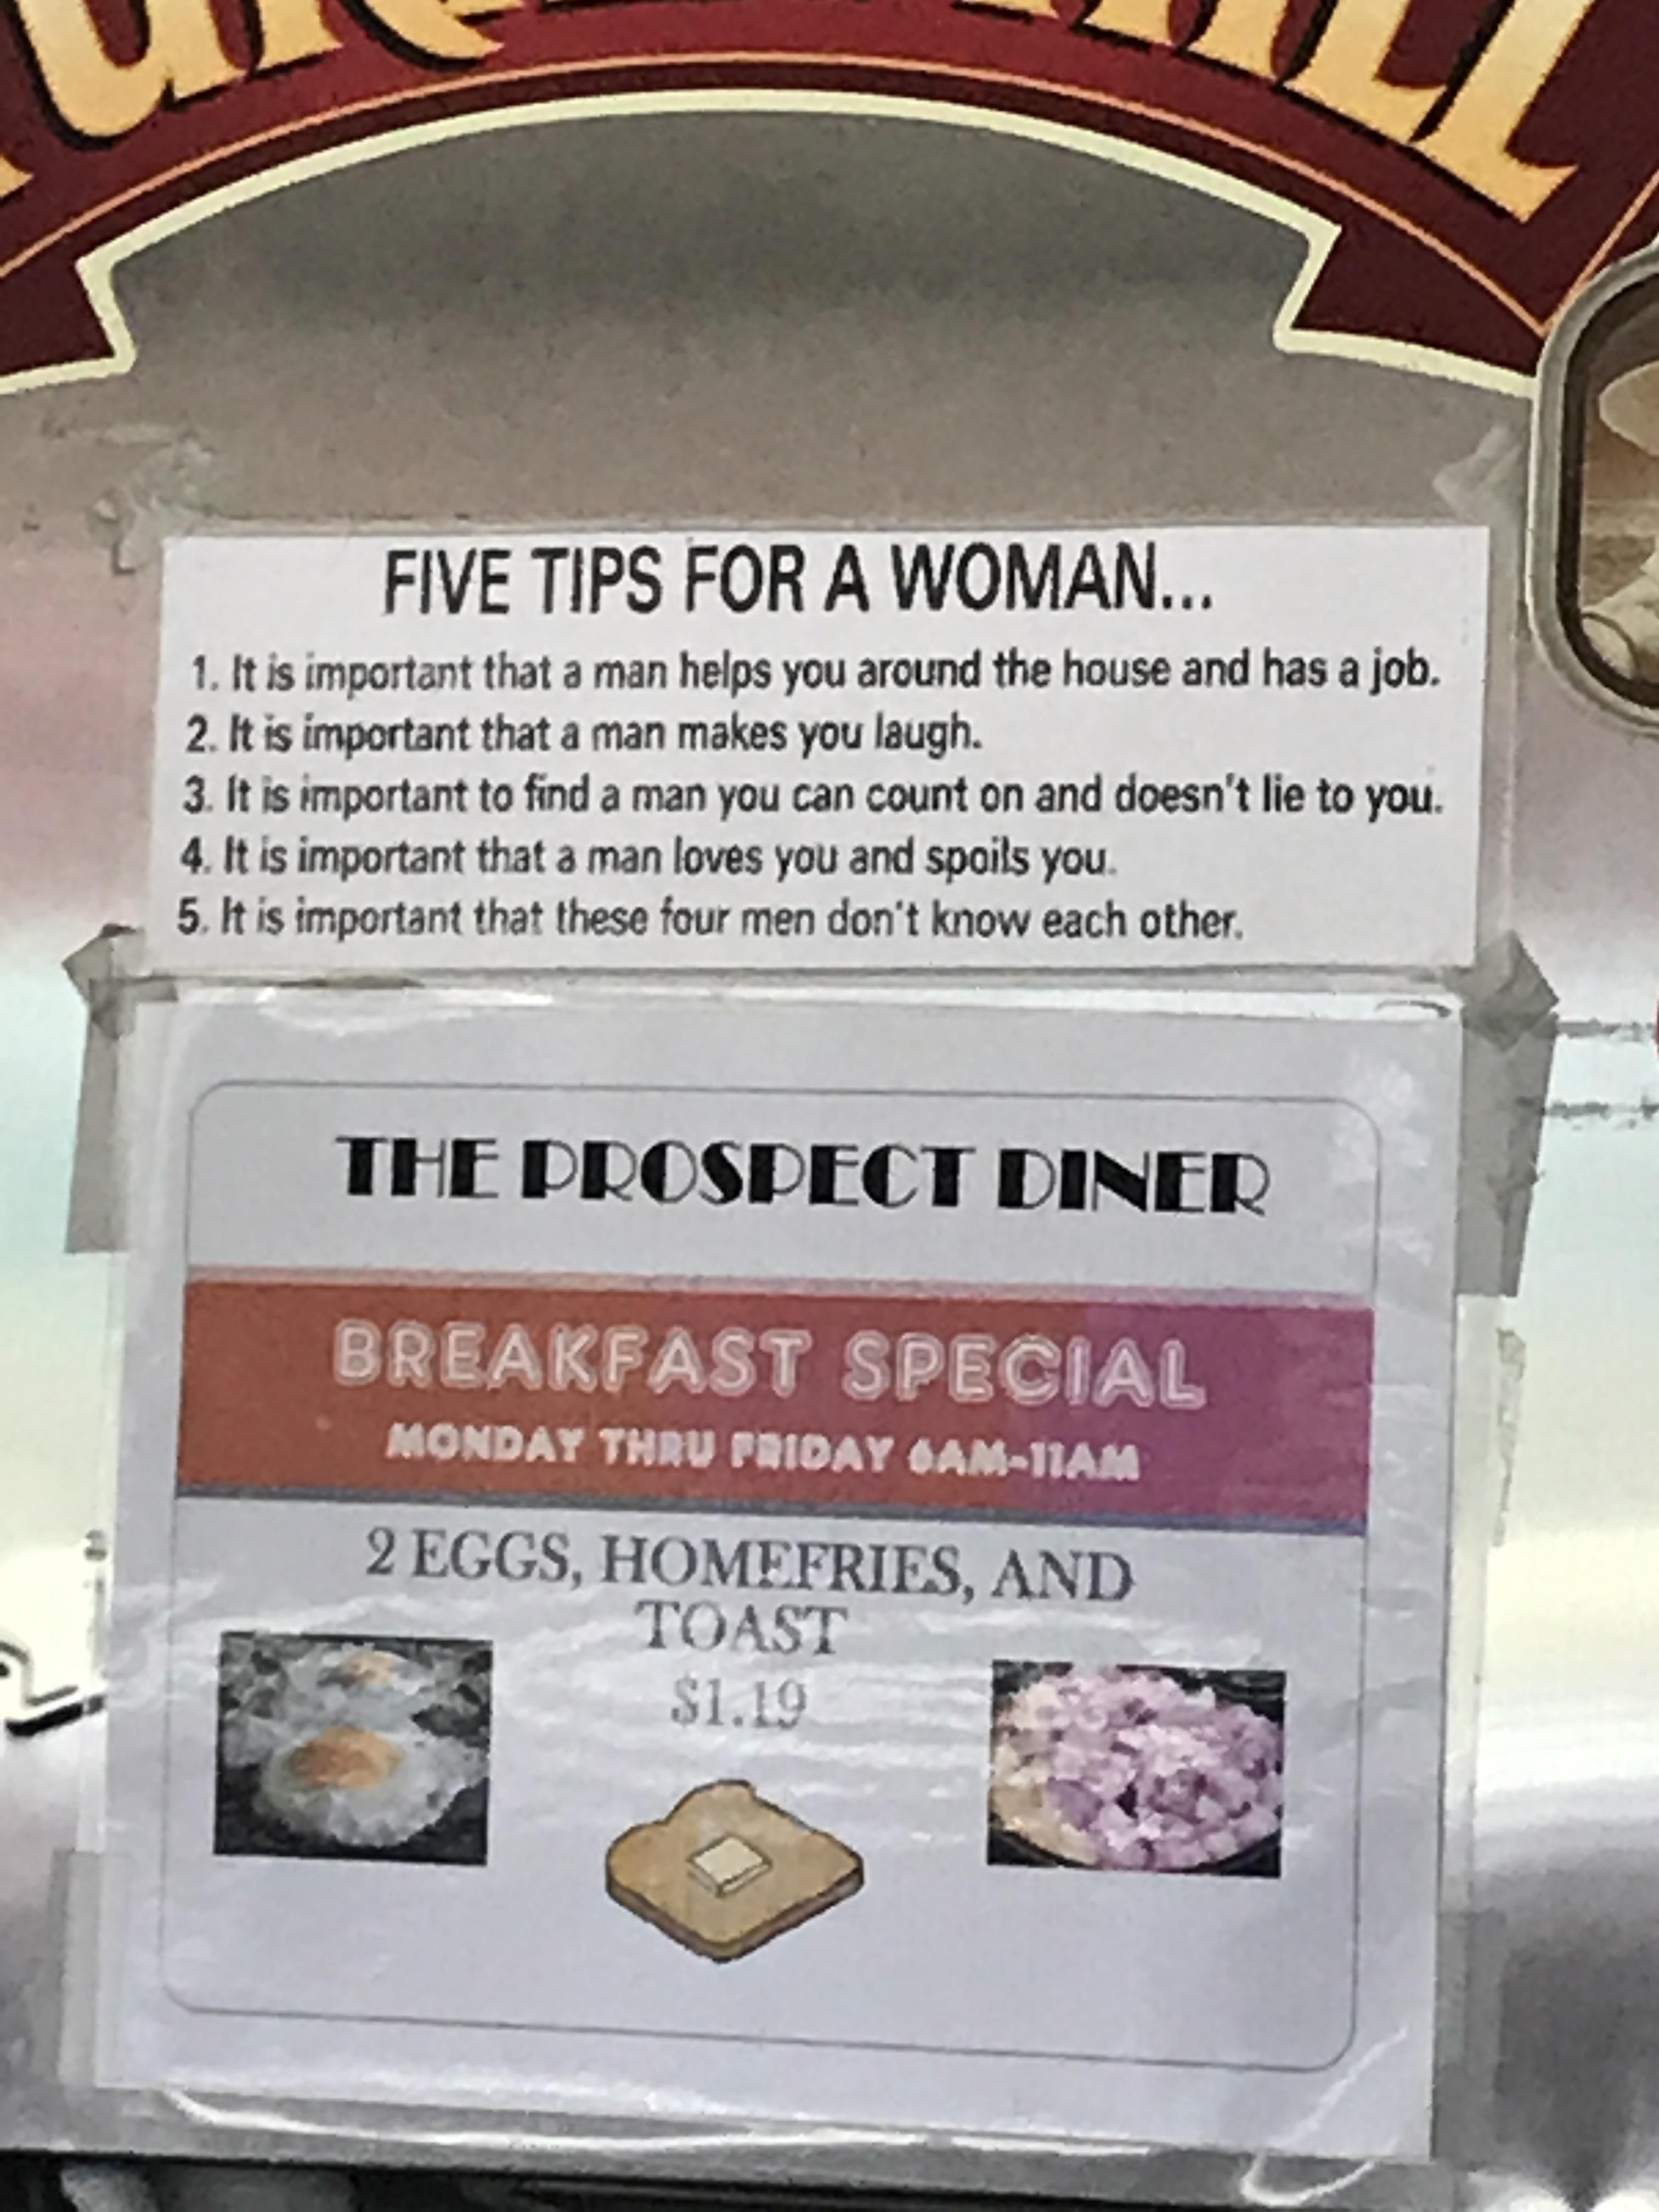 Five tips for a woman...